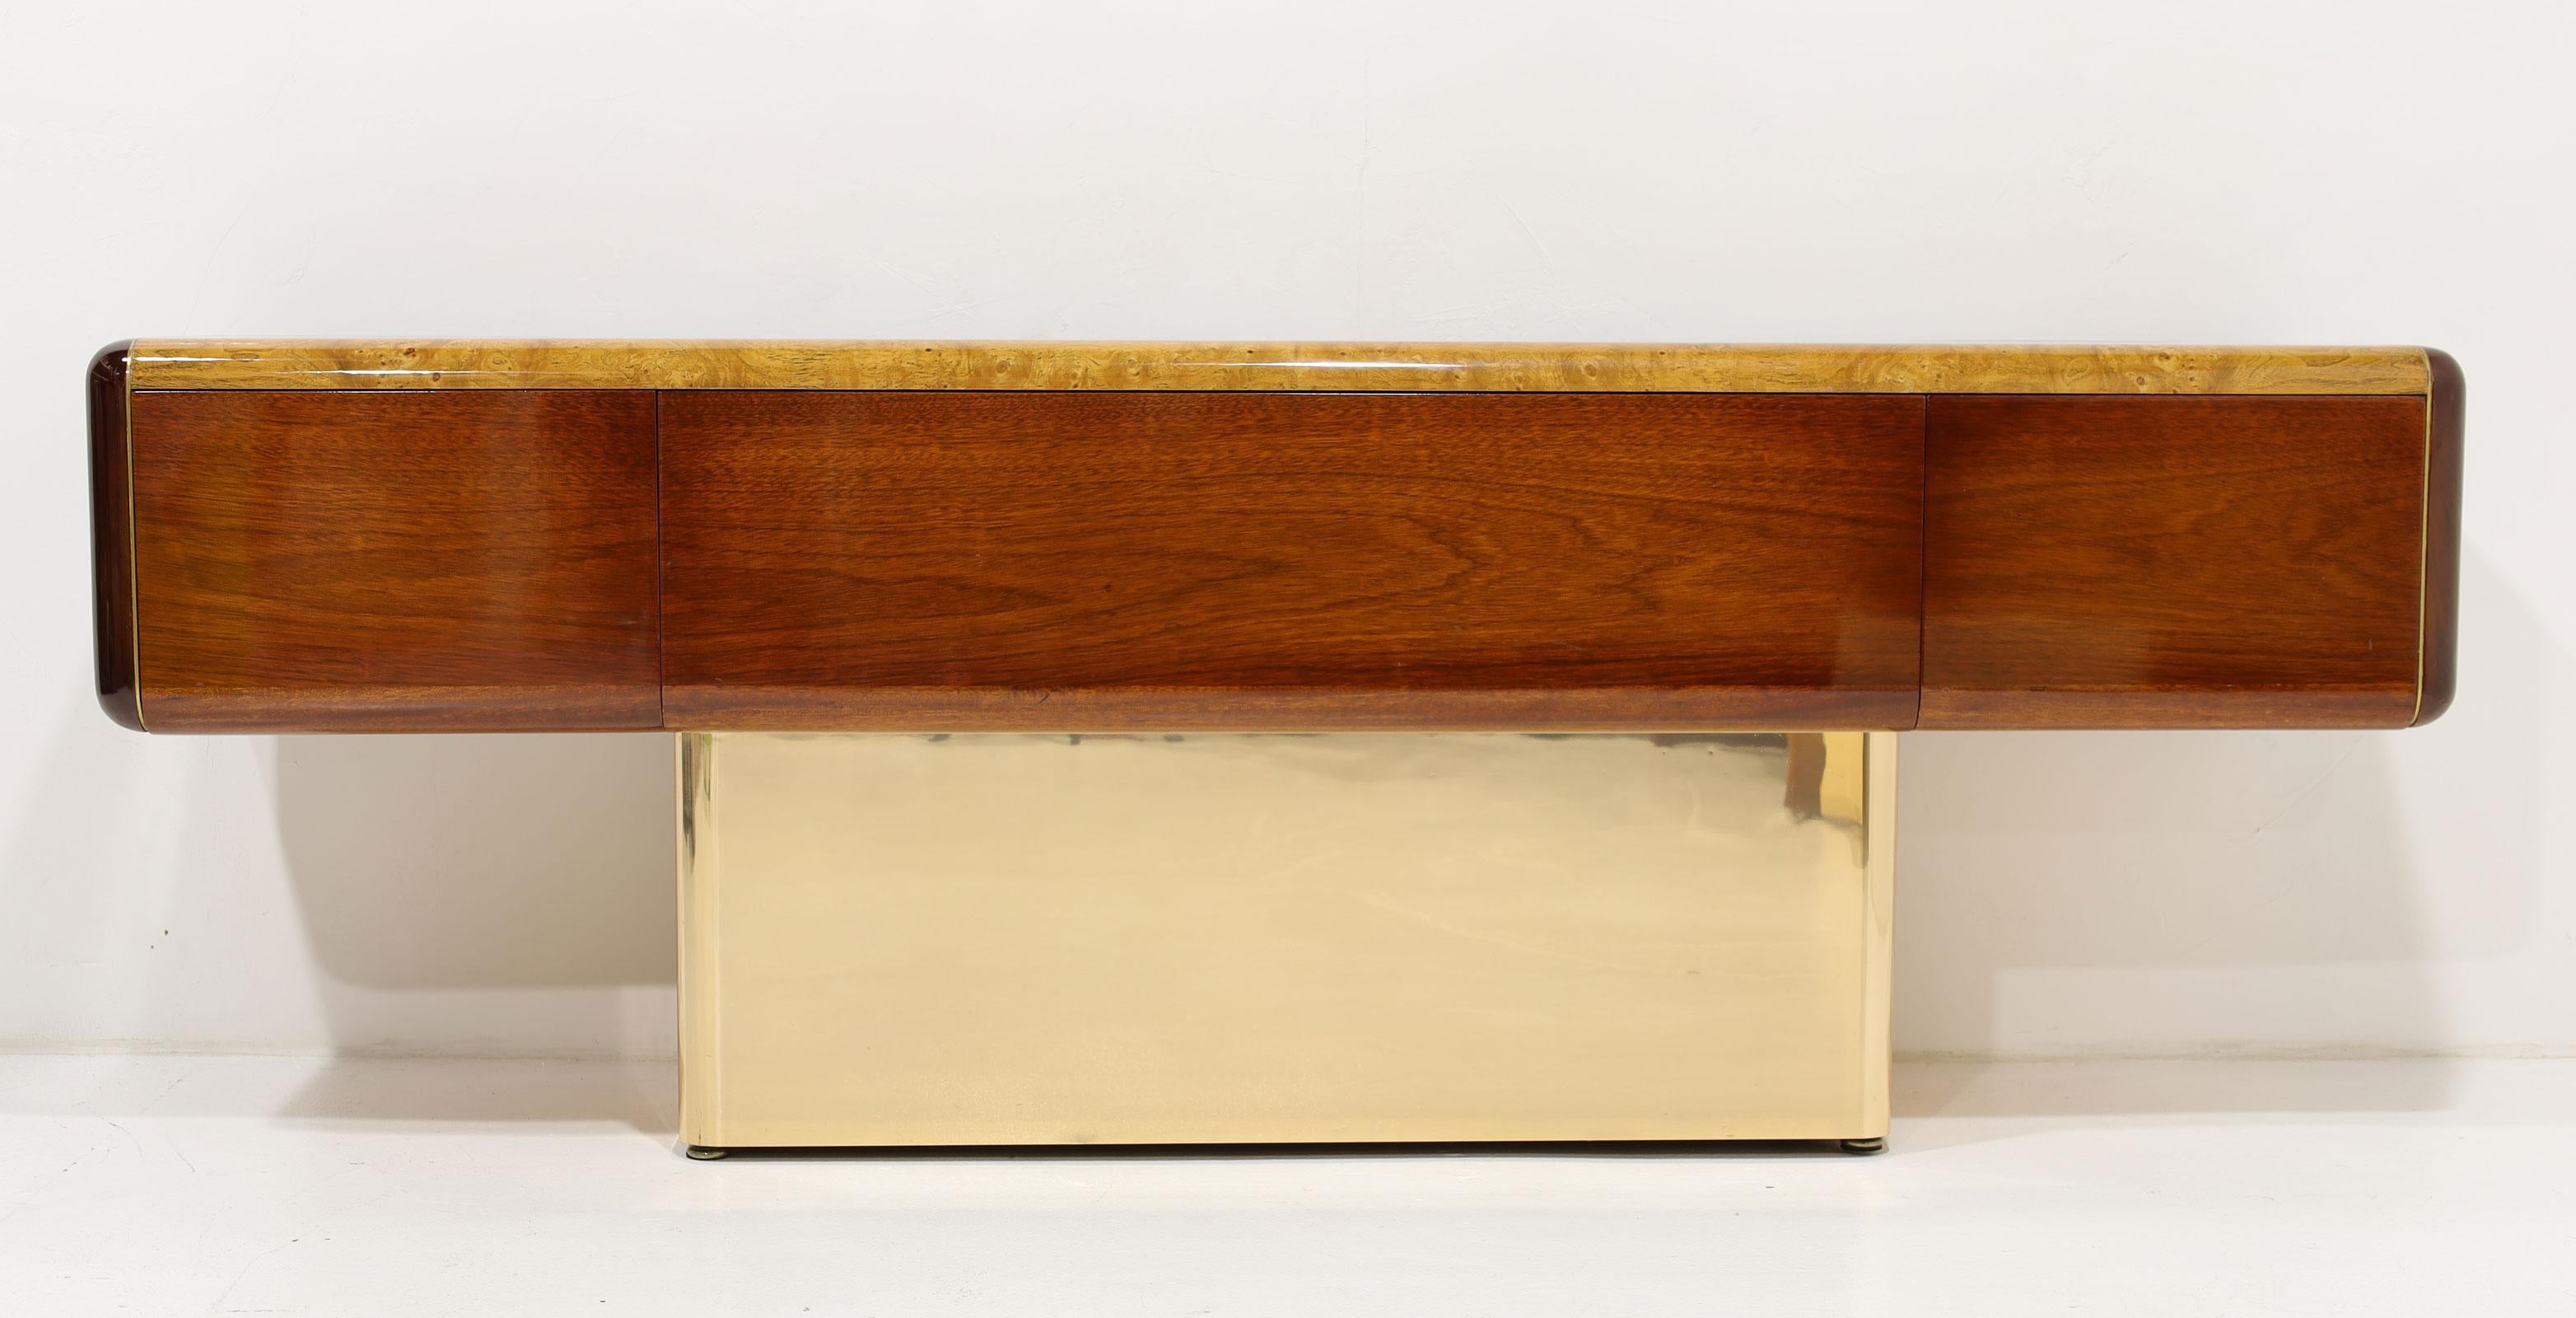 Metal Vladimir Kagan Design Desk and Credenza in Burl and Mahogany with Brass Base For Sale